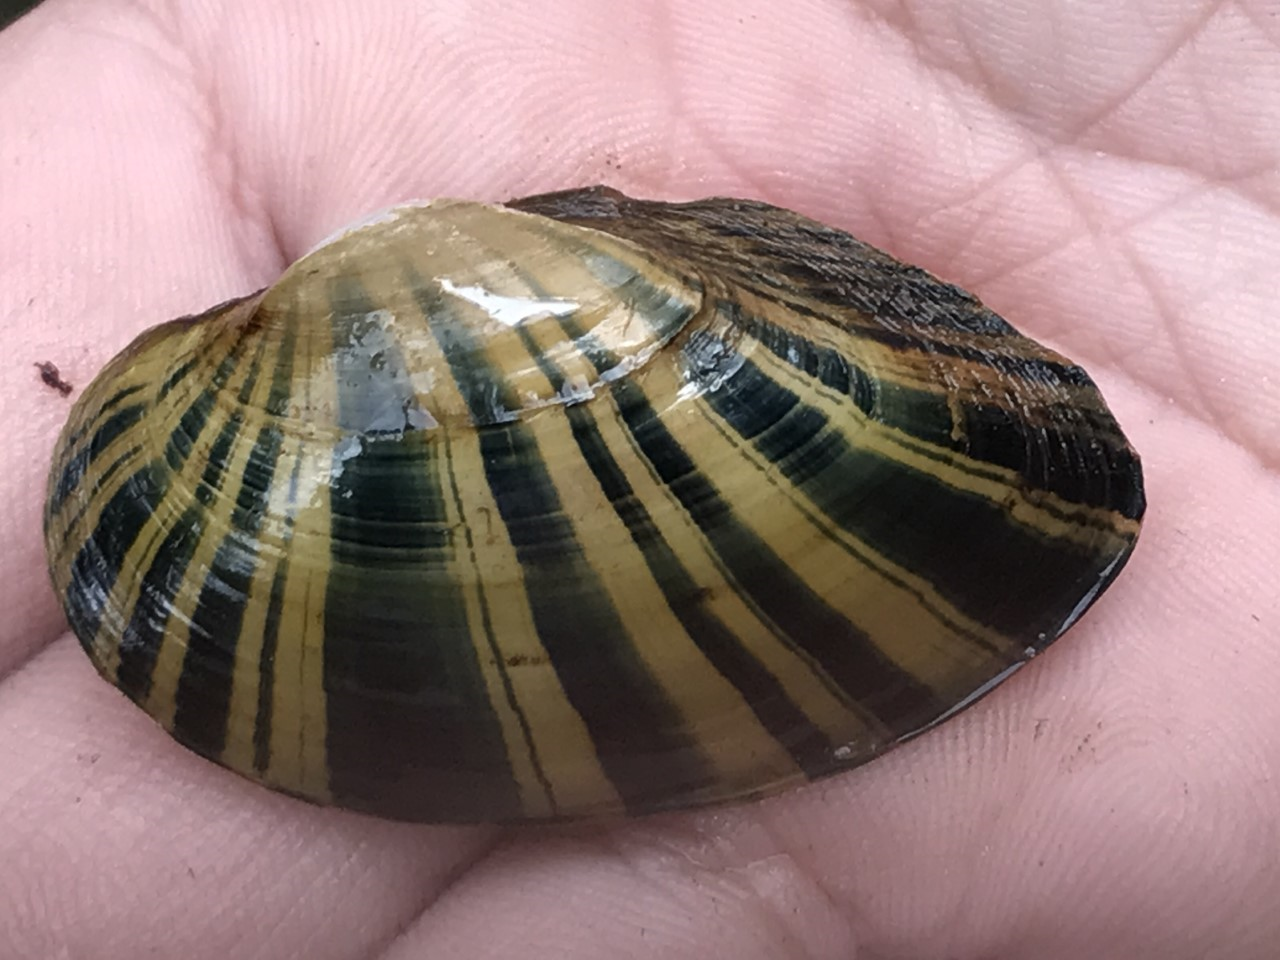 Person holding a shiny-rayed pocketbook mussel in hand